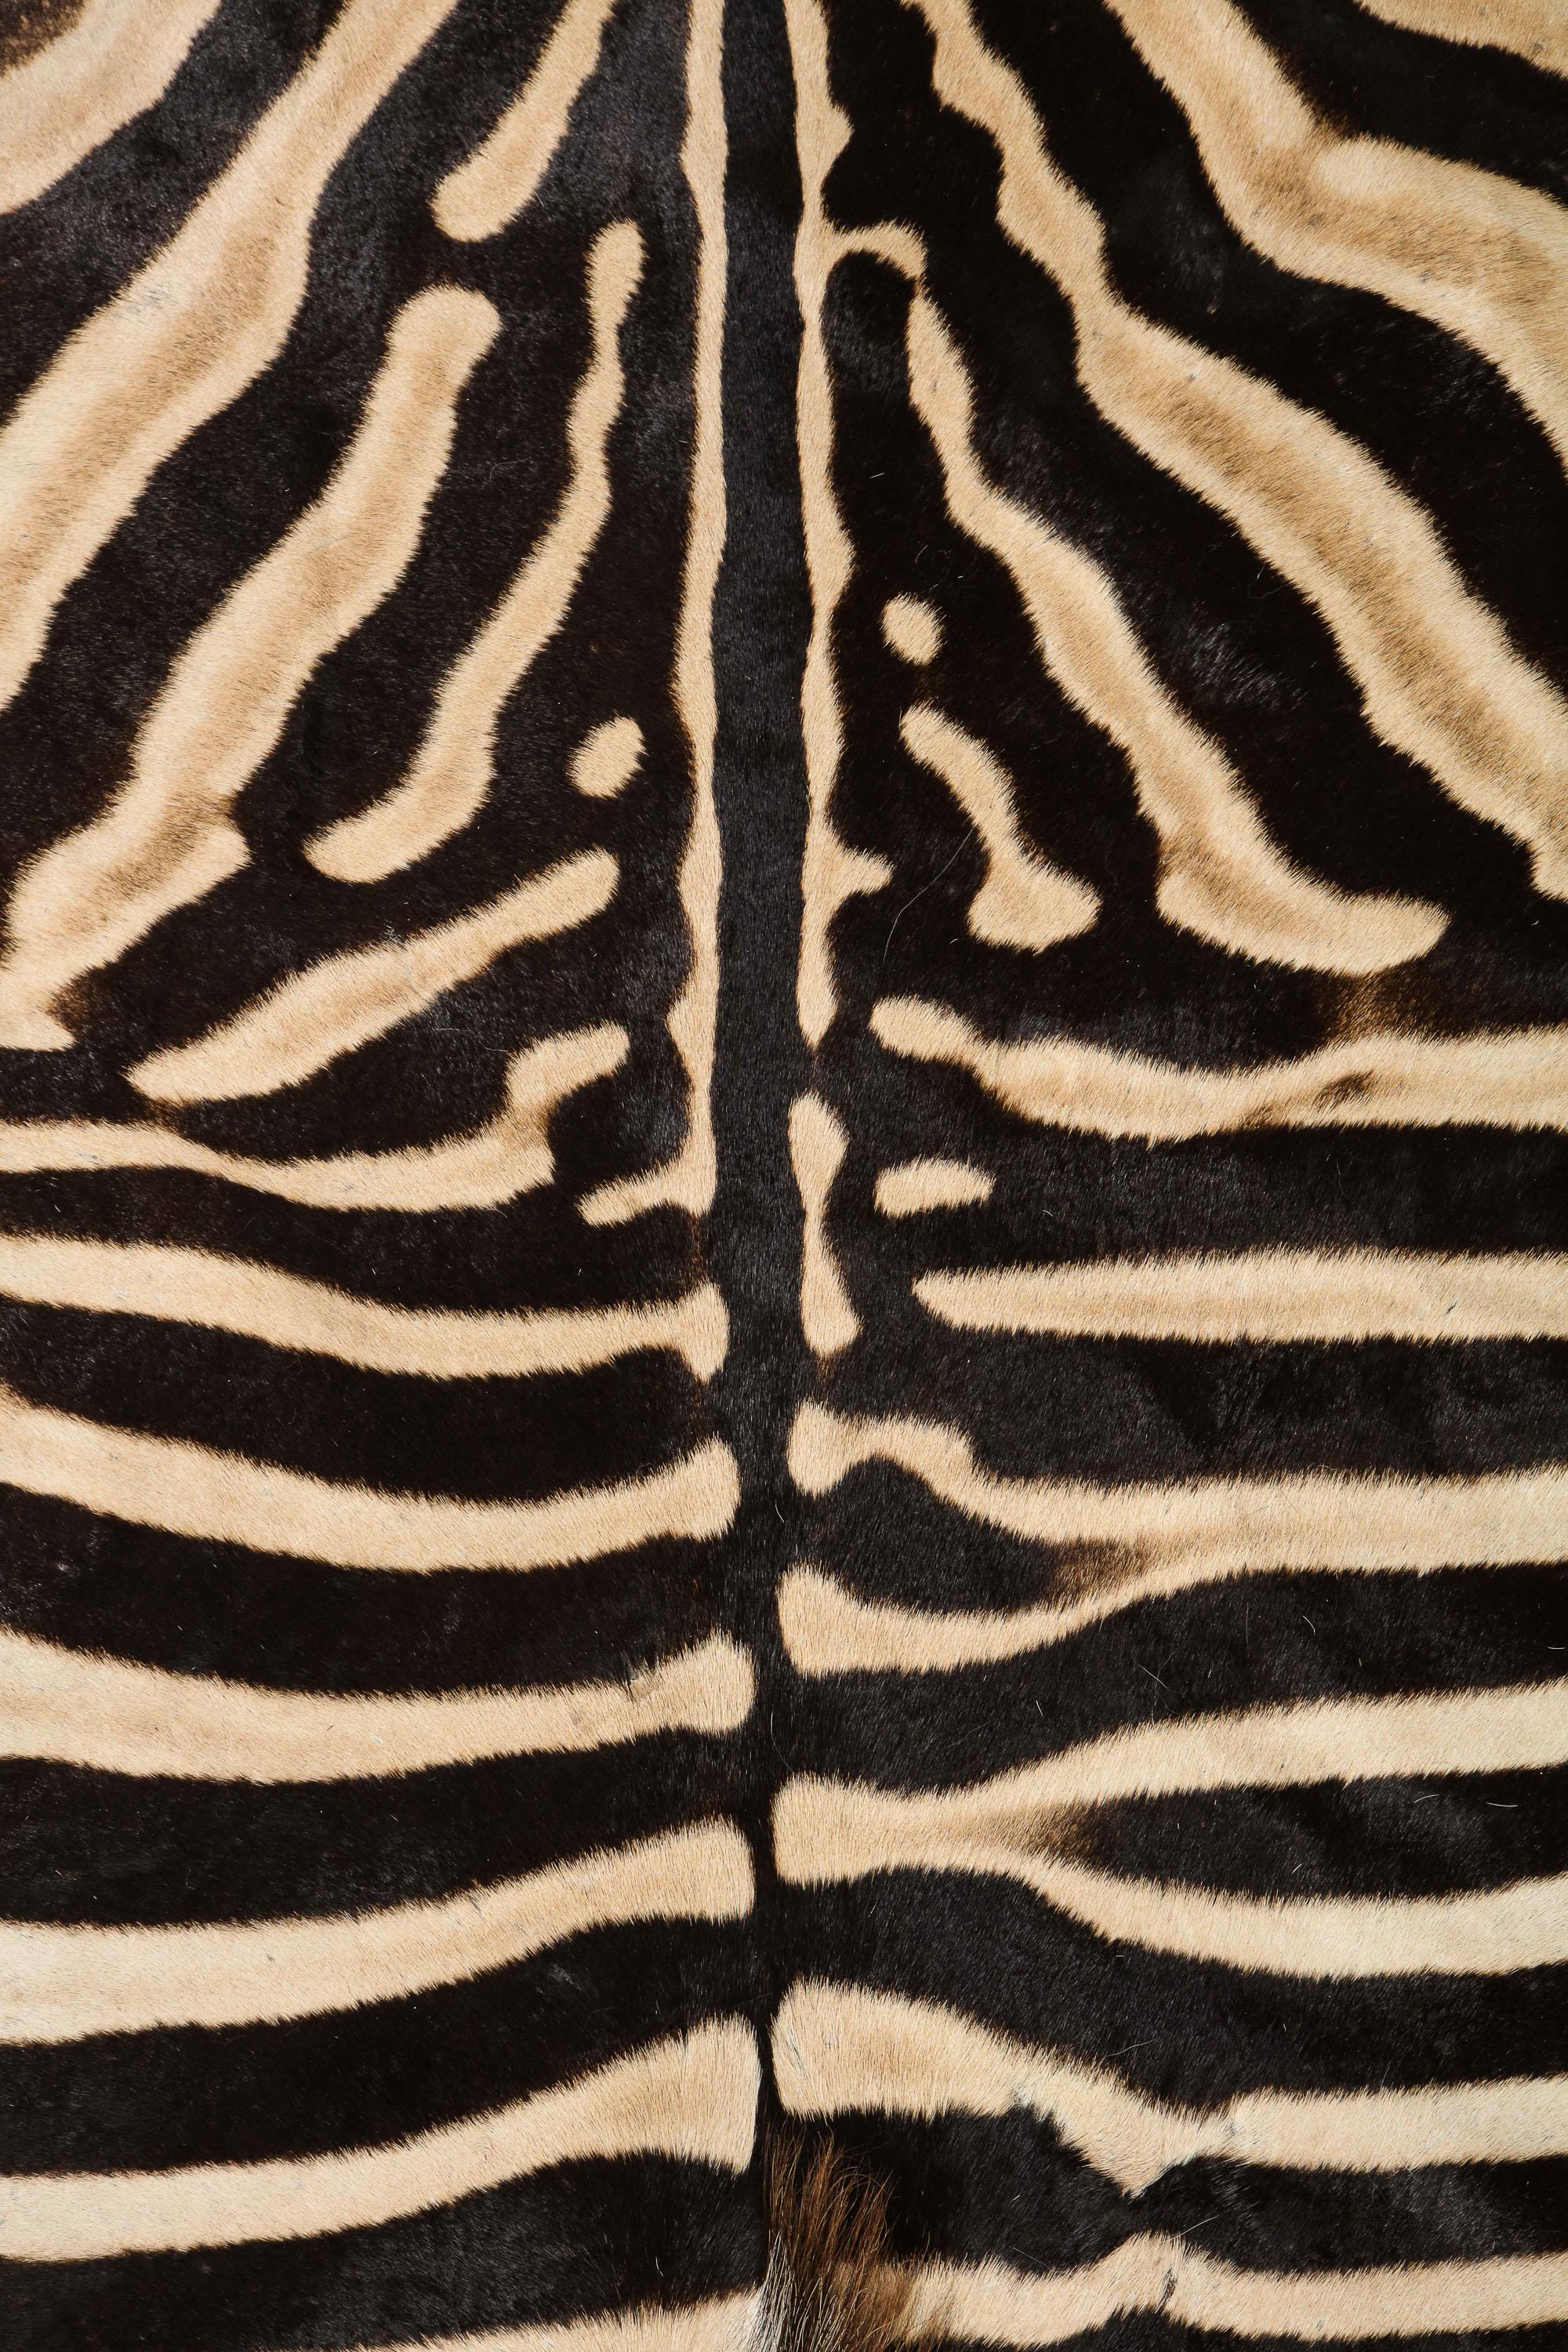 Zebra Hide Zebra Rug, South Africa, Wool Felt Backed with Leather Trim, In Stock, New Hide For Sale